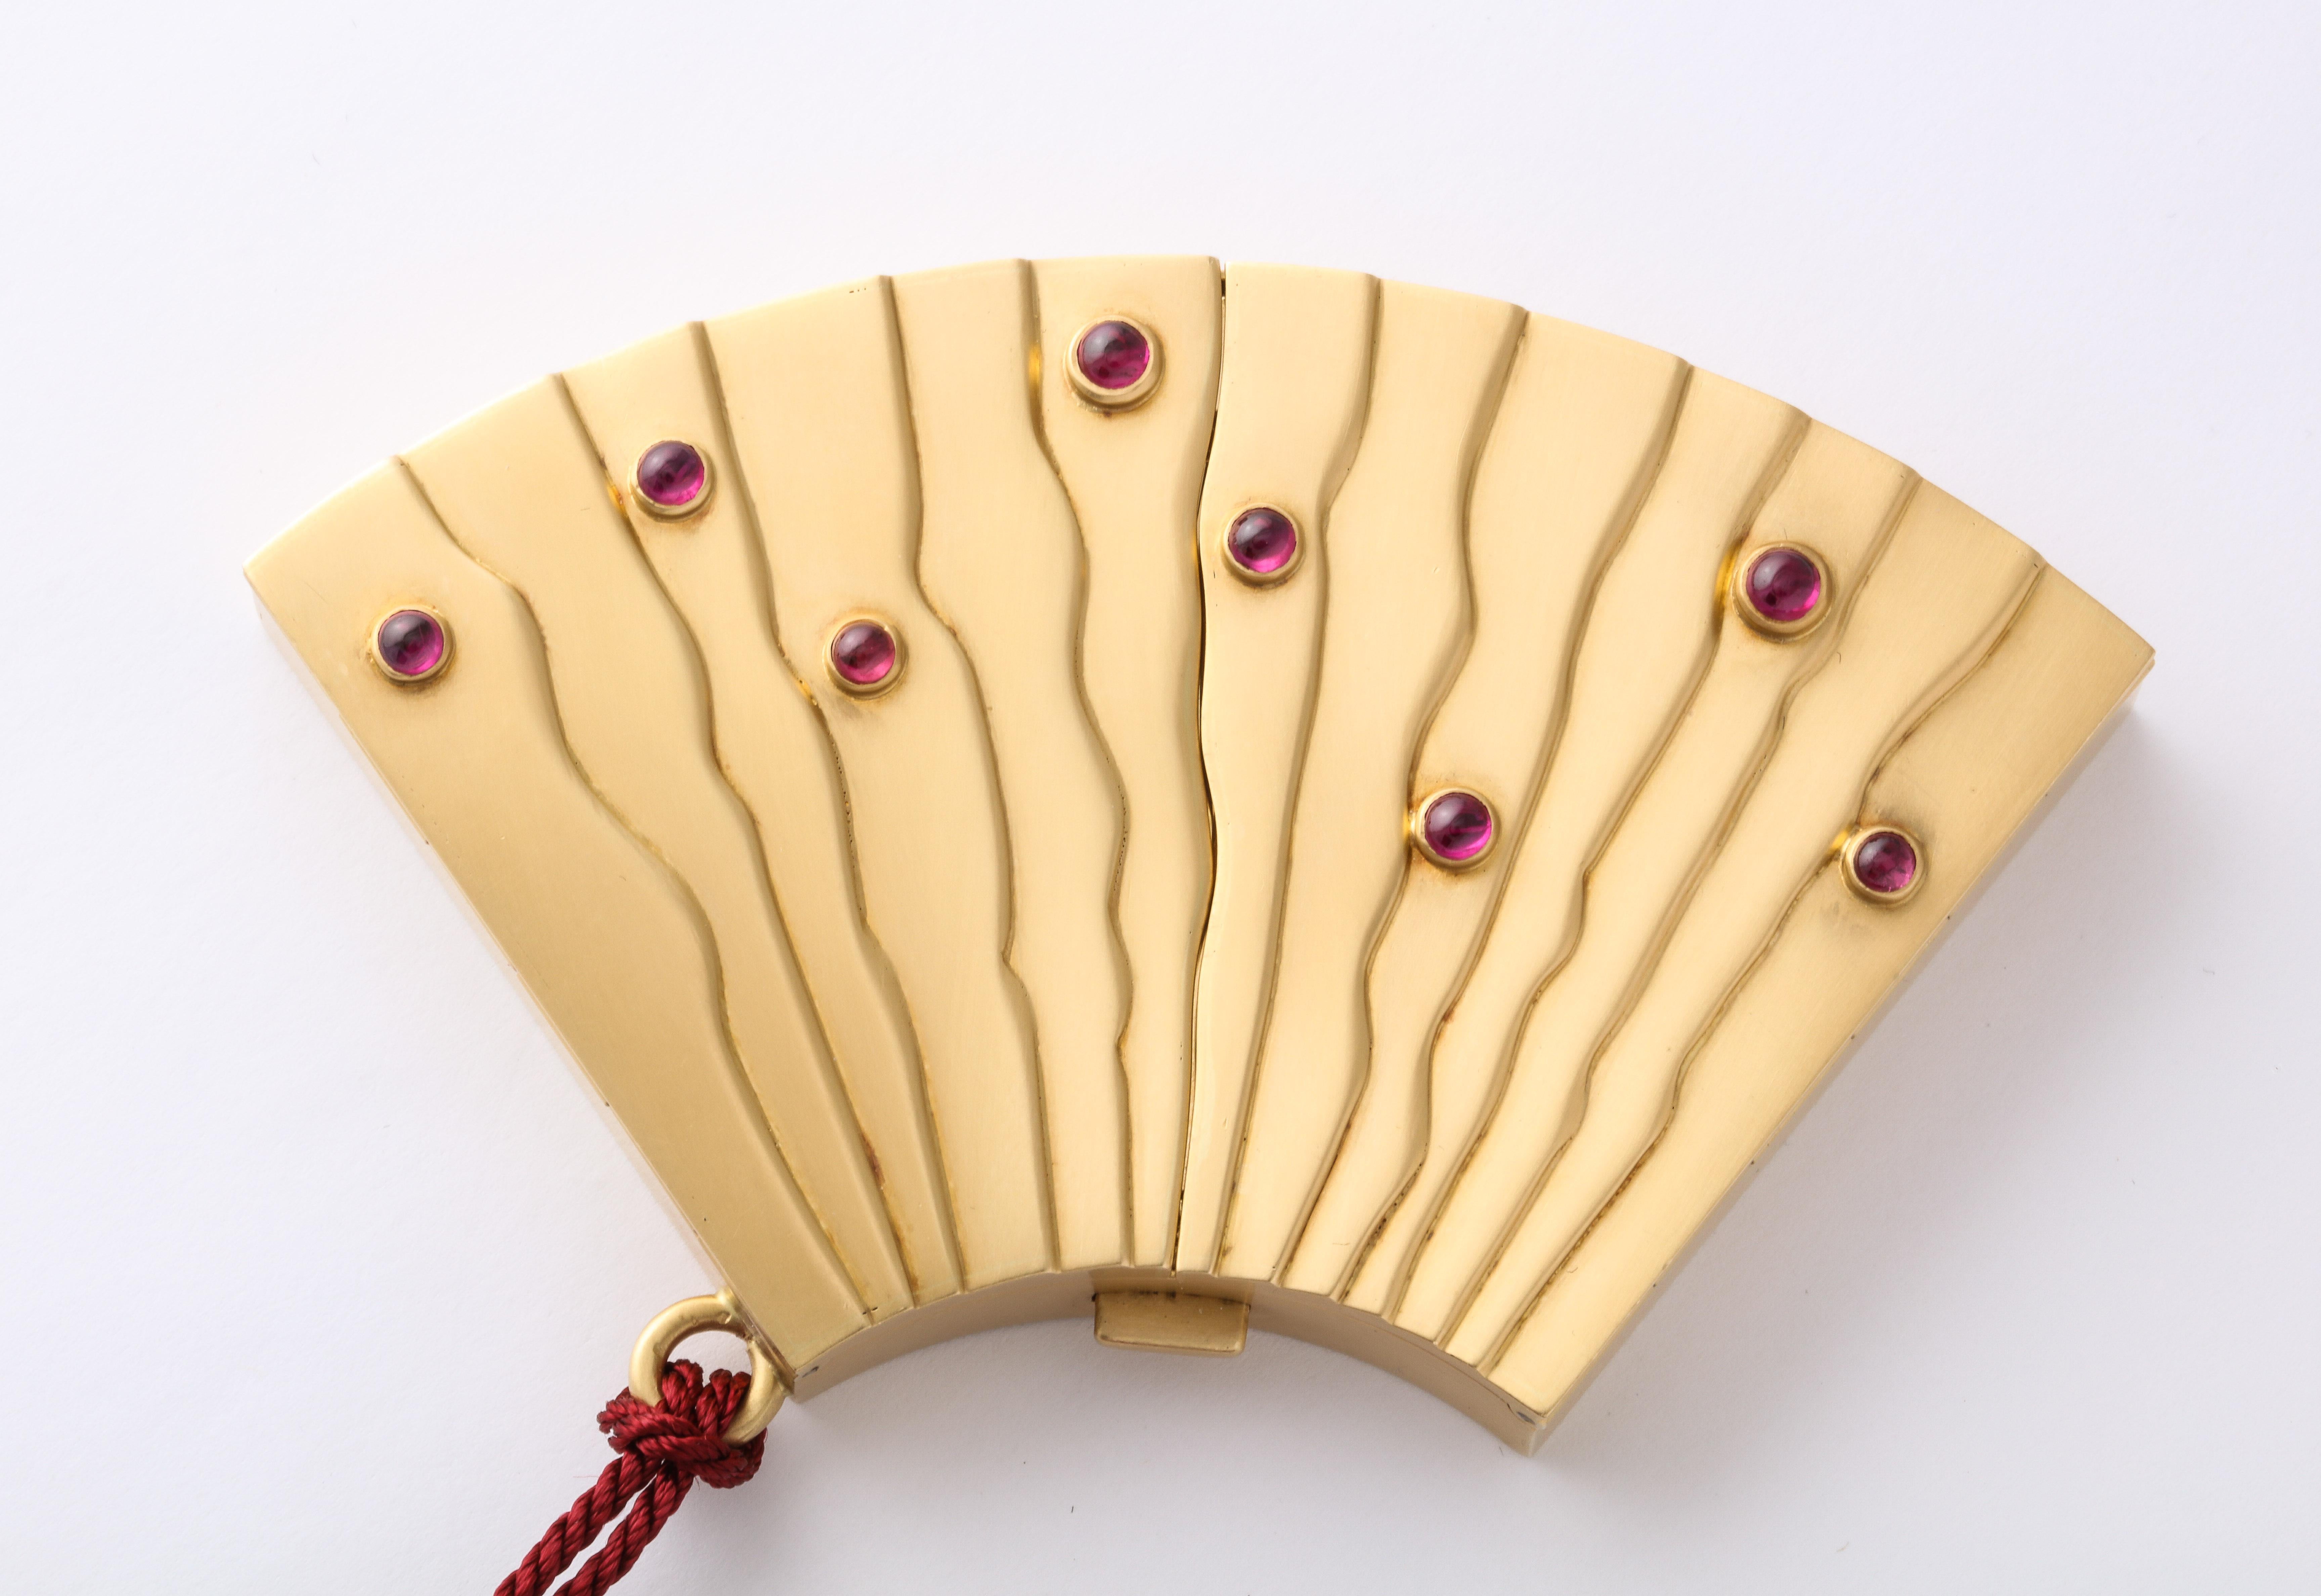 Angela Cummings fan-shaped compact in 18k yellow gold with red tassel, bezel set with 8 cabochon rubies totaling approximately 1 carat. Marked 750, Cummings.  Circa 1970, never used.

Material:
18k Yellow Gold

Stones:
8 cabochon rubies, totaling